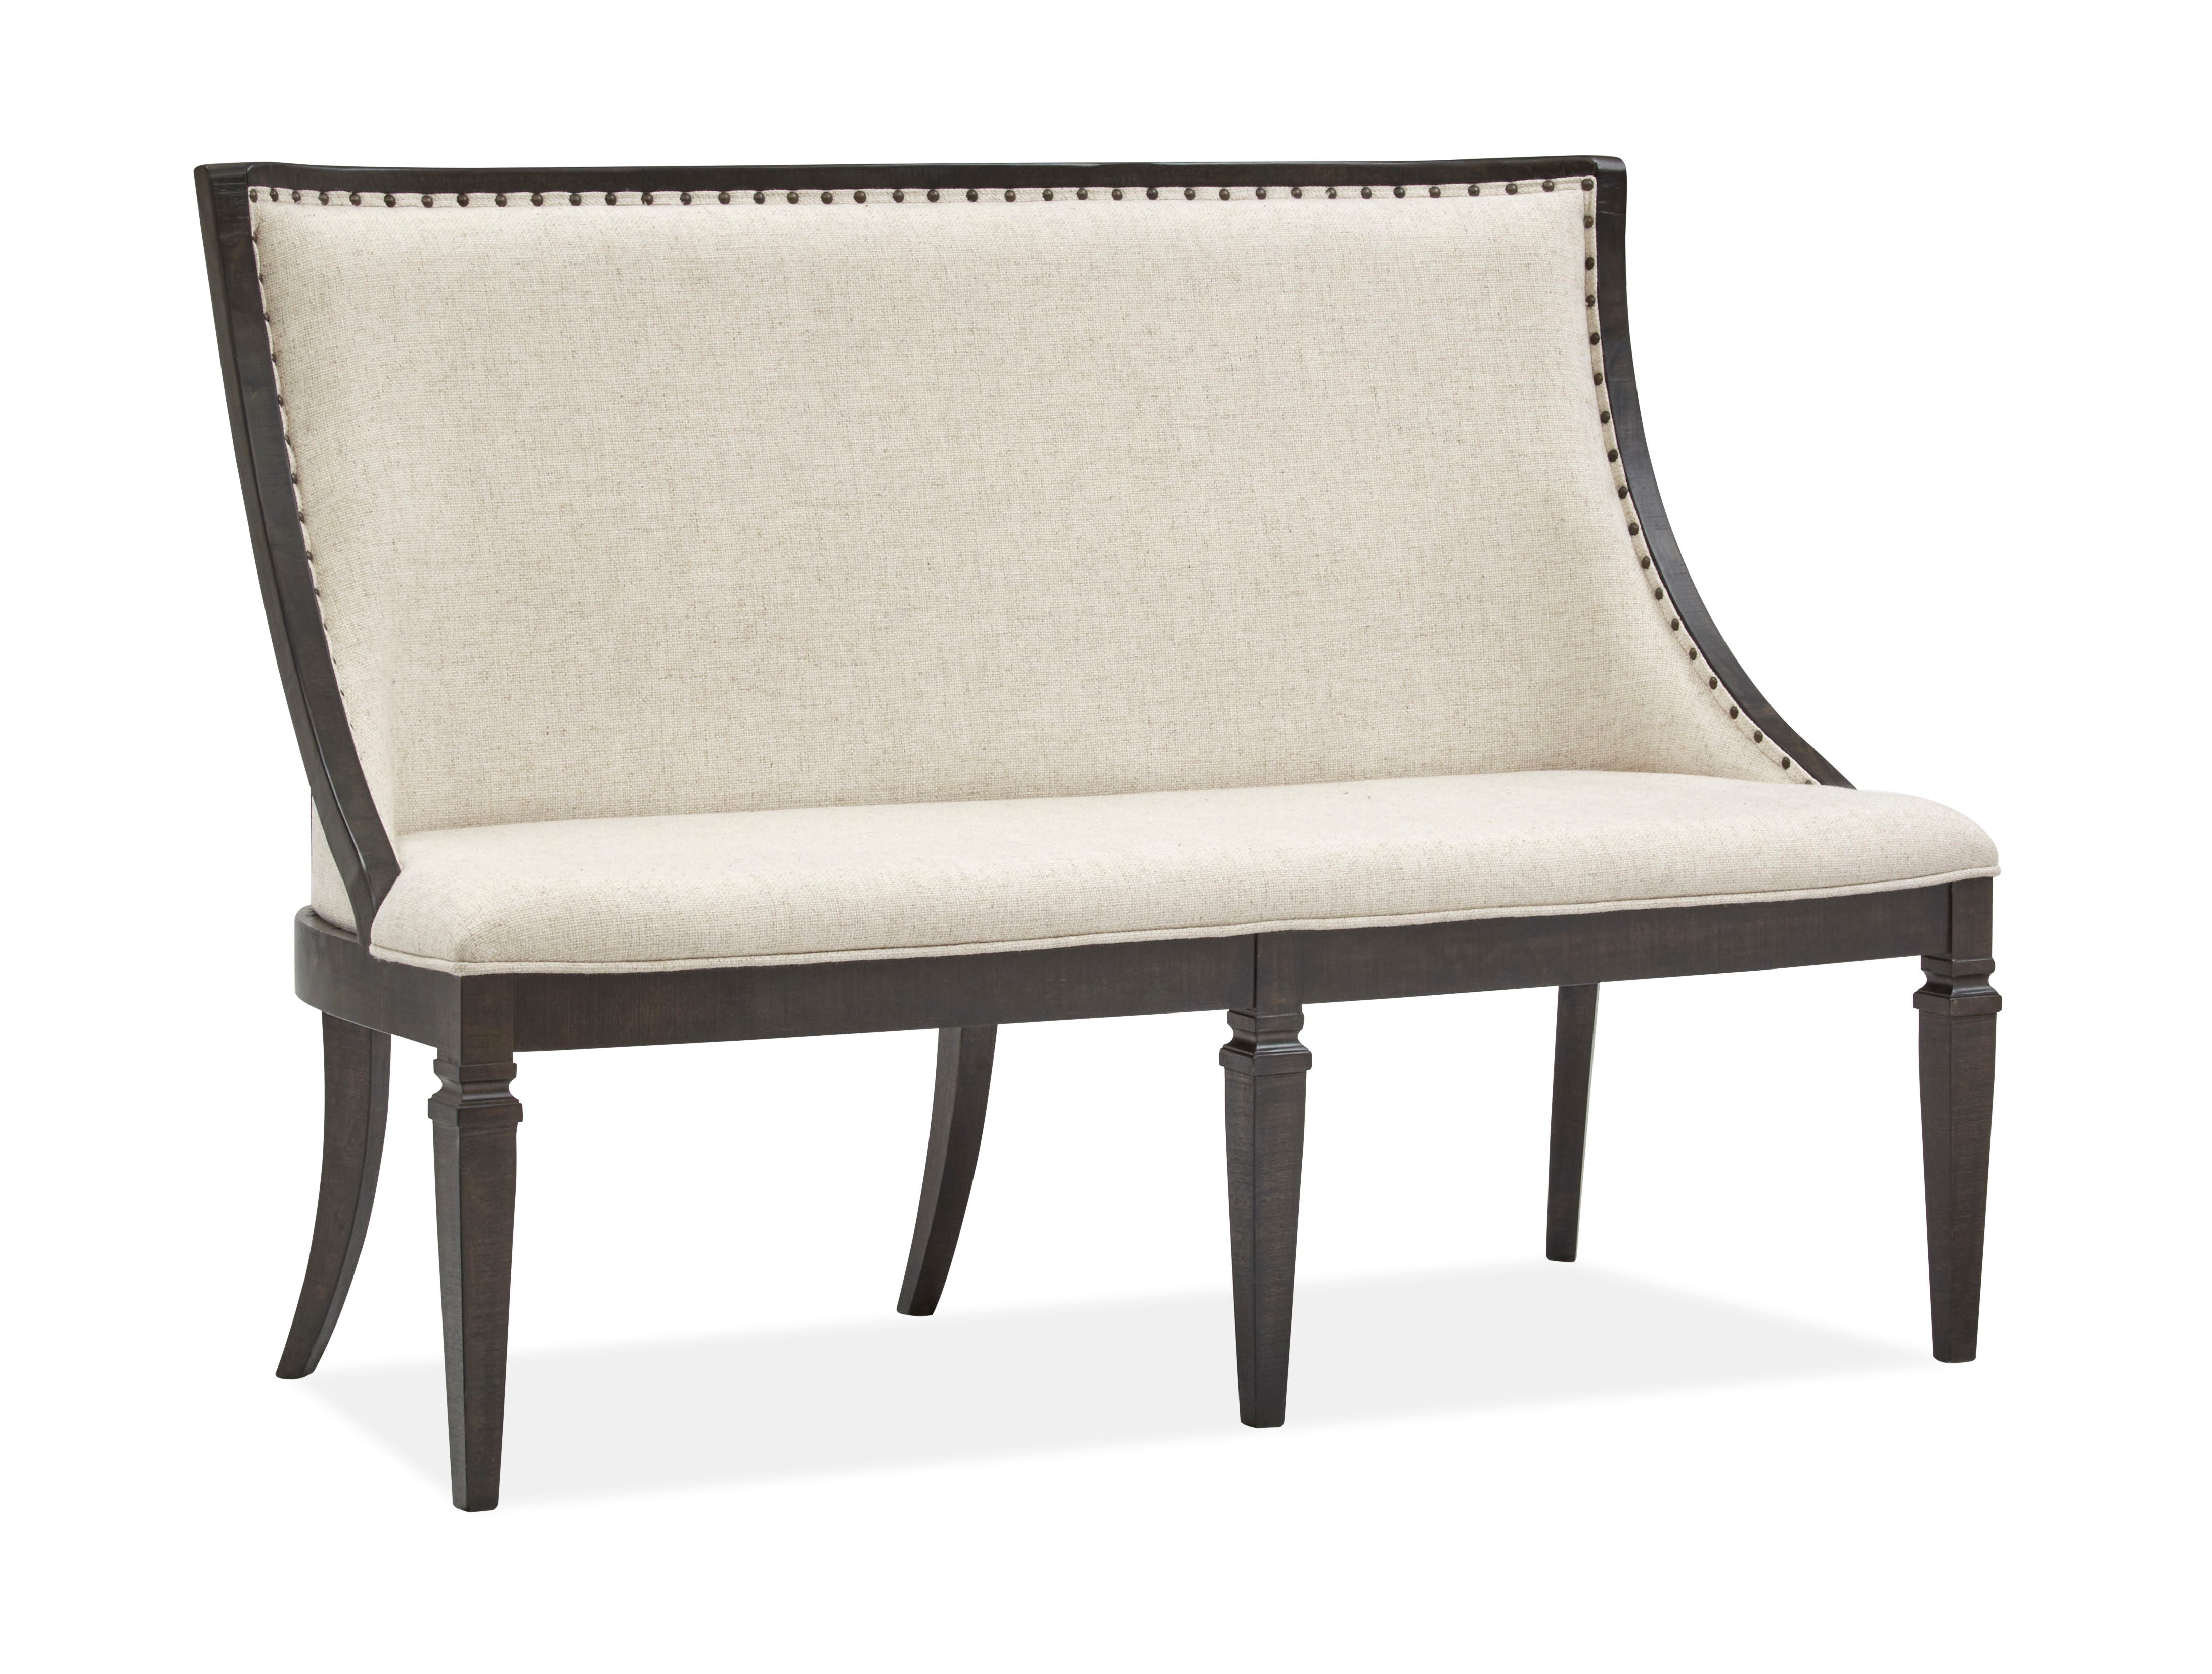 Calistoga - Bench With Upholstered Seat & Back - Weathered Charcoal